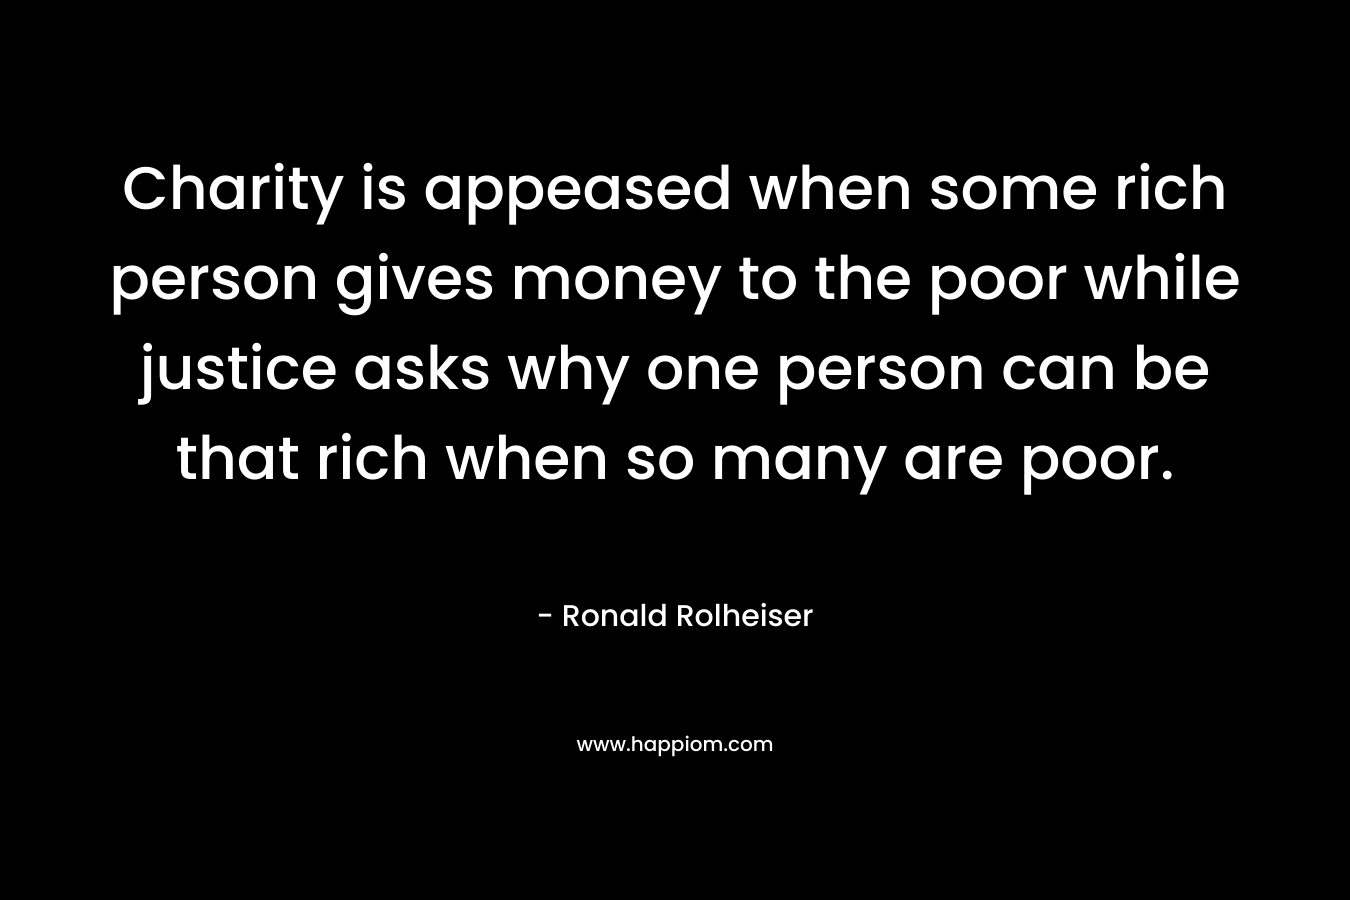 Charity is appeased when some rich person gives money to the poor while justice asks why one person can be that rich when so many are poor. – Ronald Rolheiser